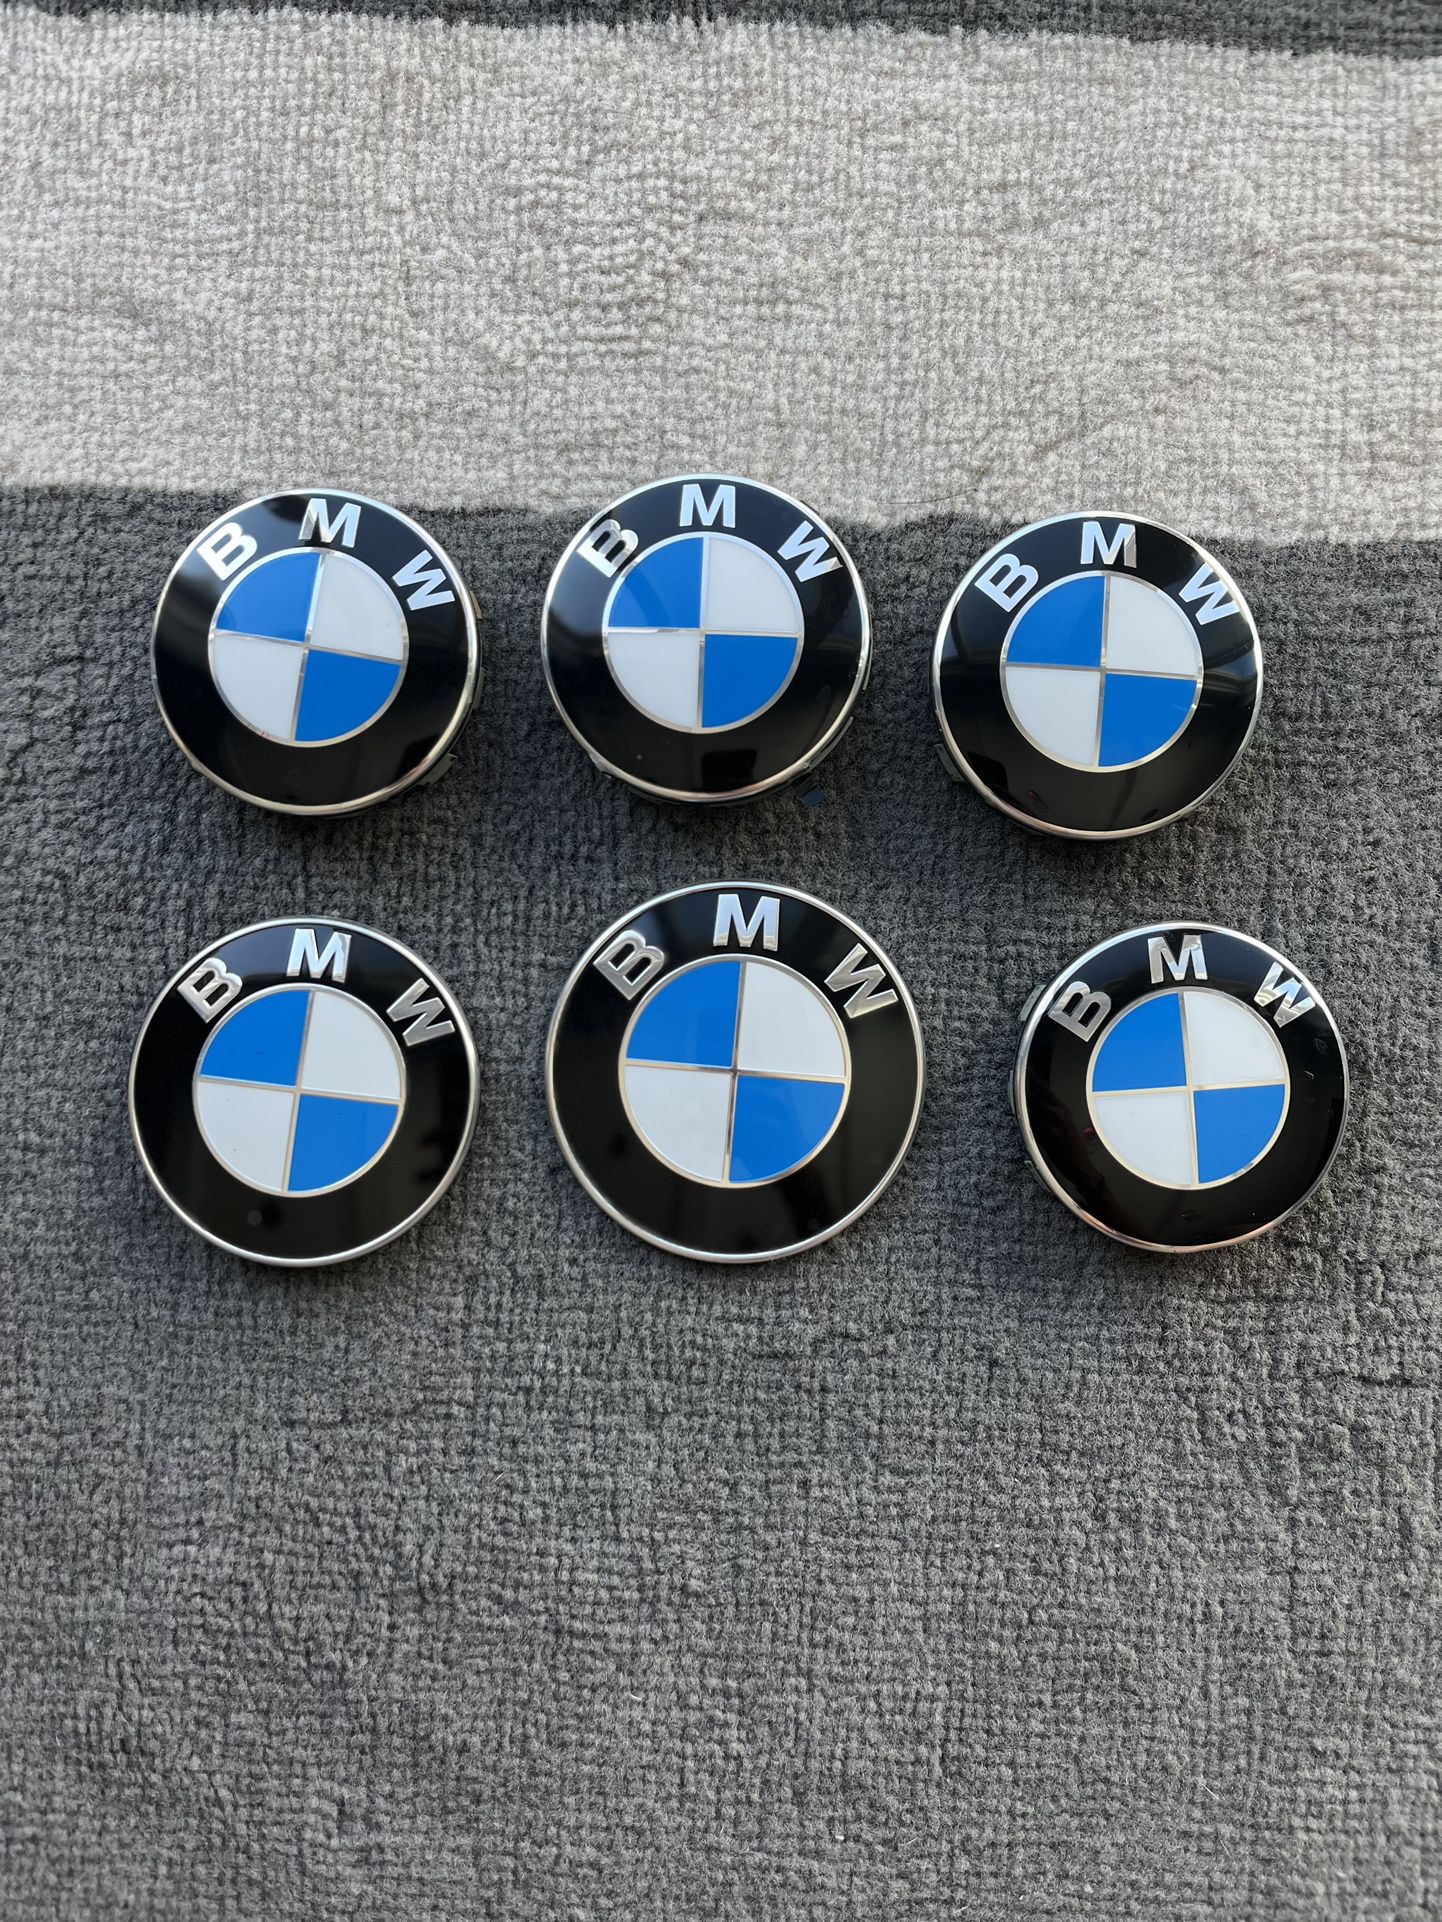 Bmw Oem Caps from F30